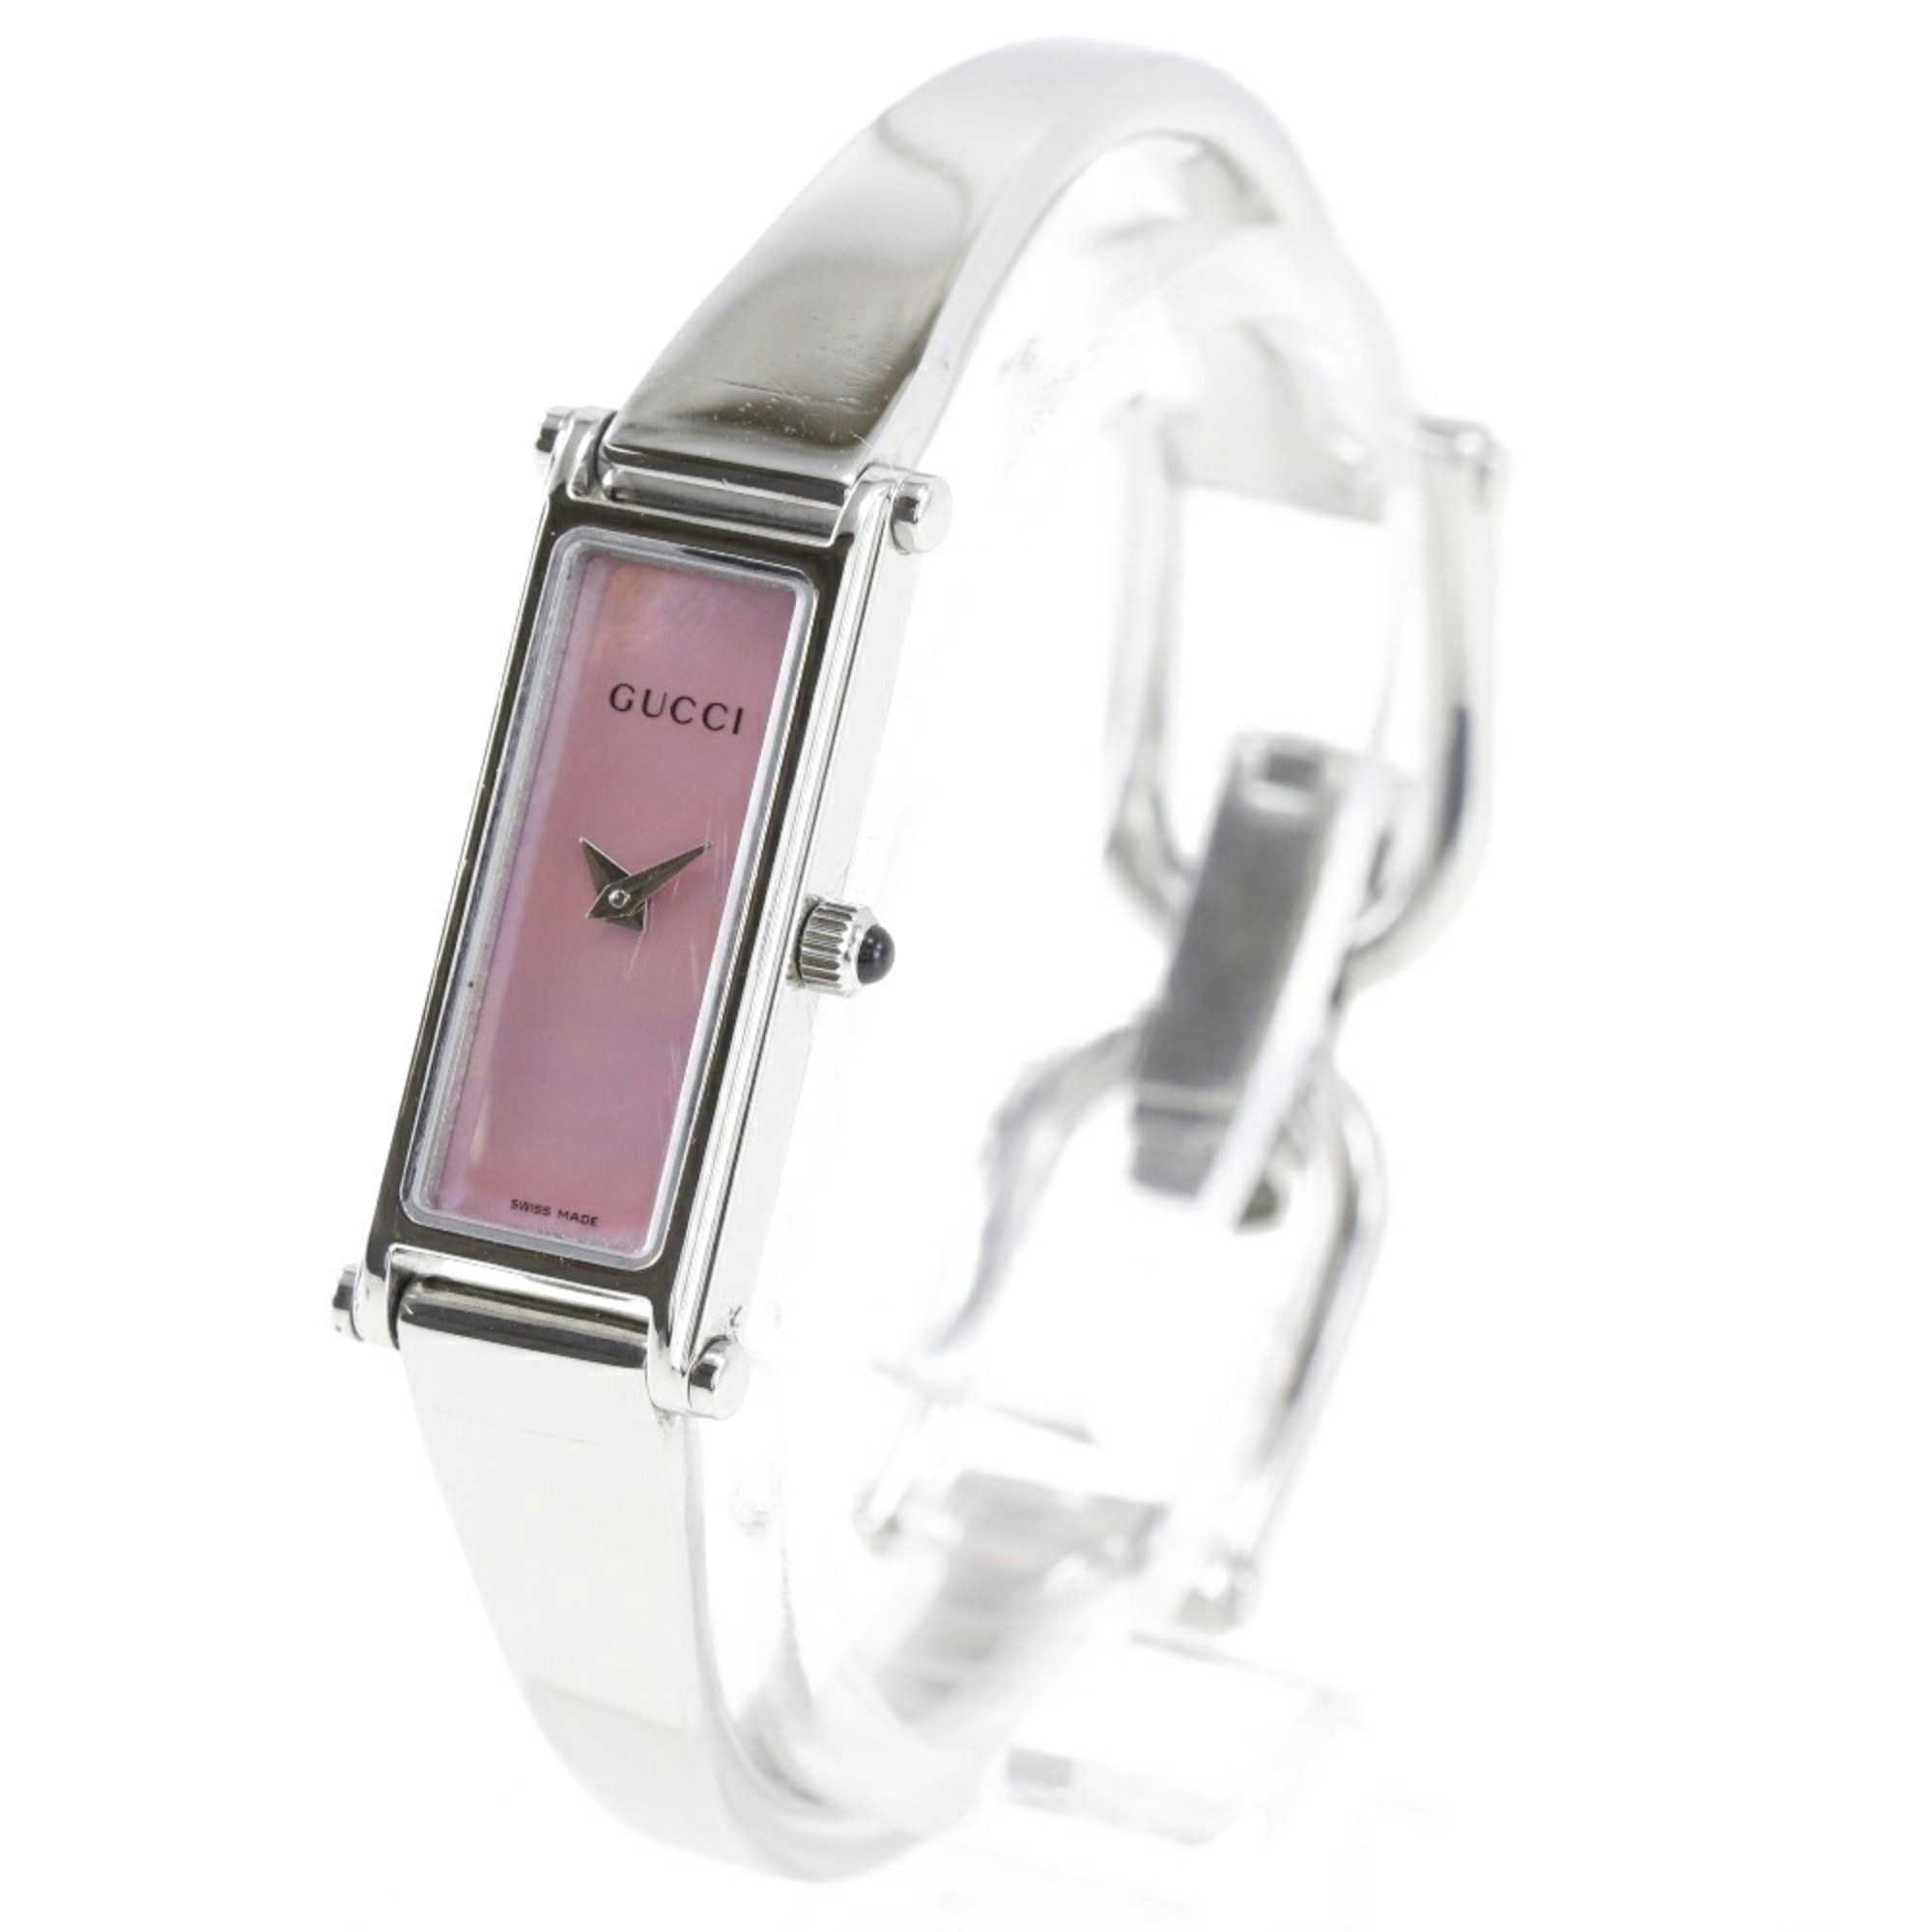 Gucci Watch 1500L Stainless Steel Quartz Analog Display Pink Dial Women's I120224024